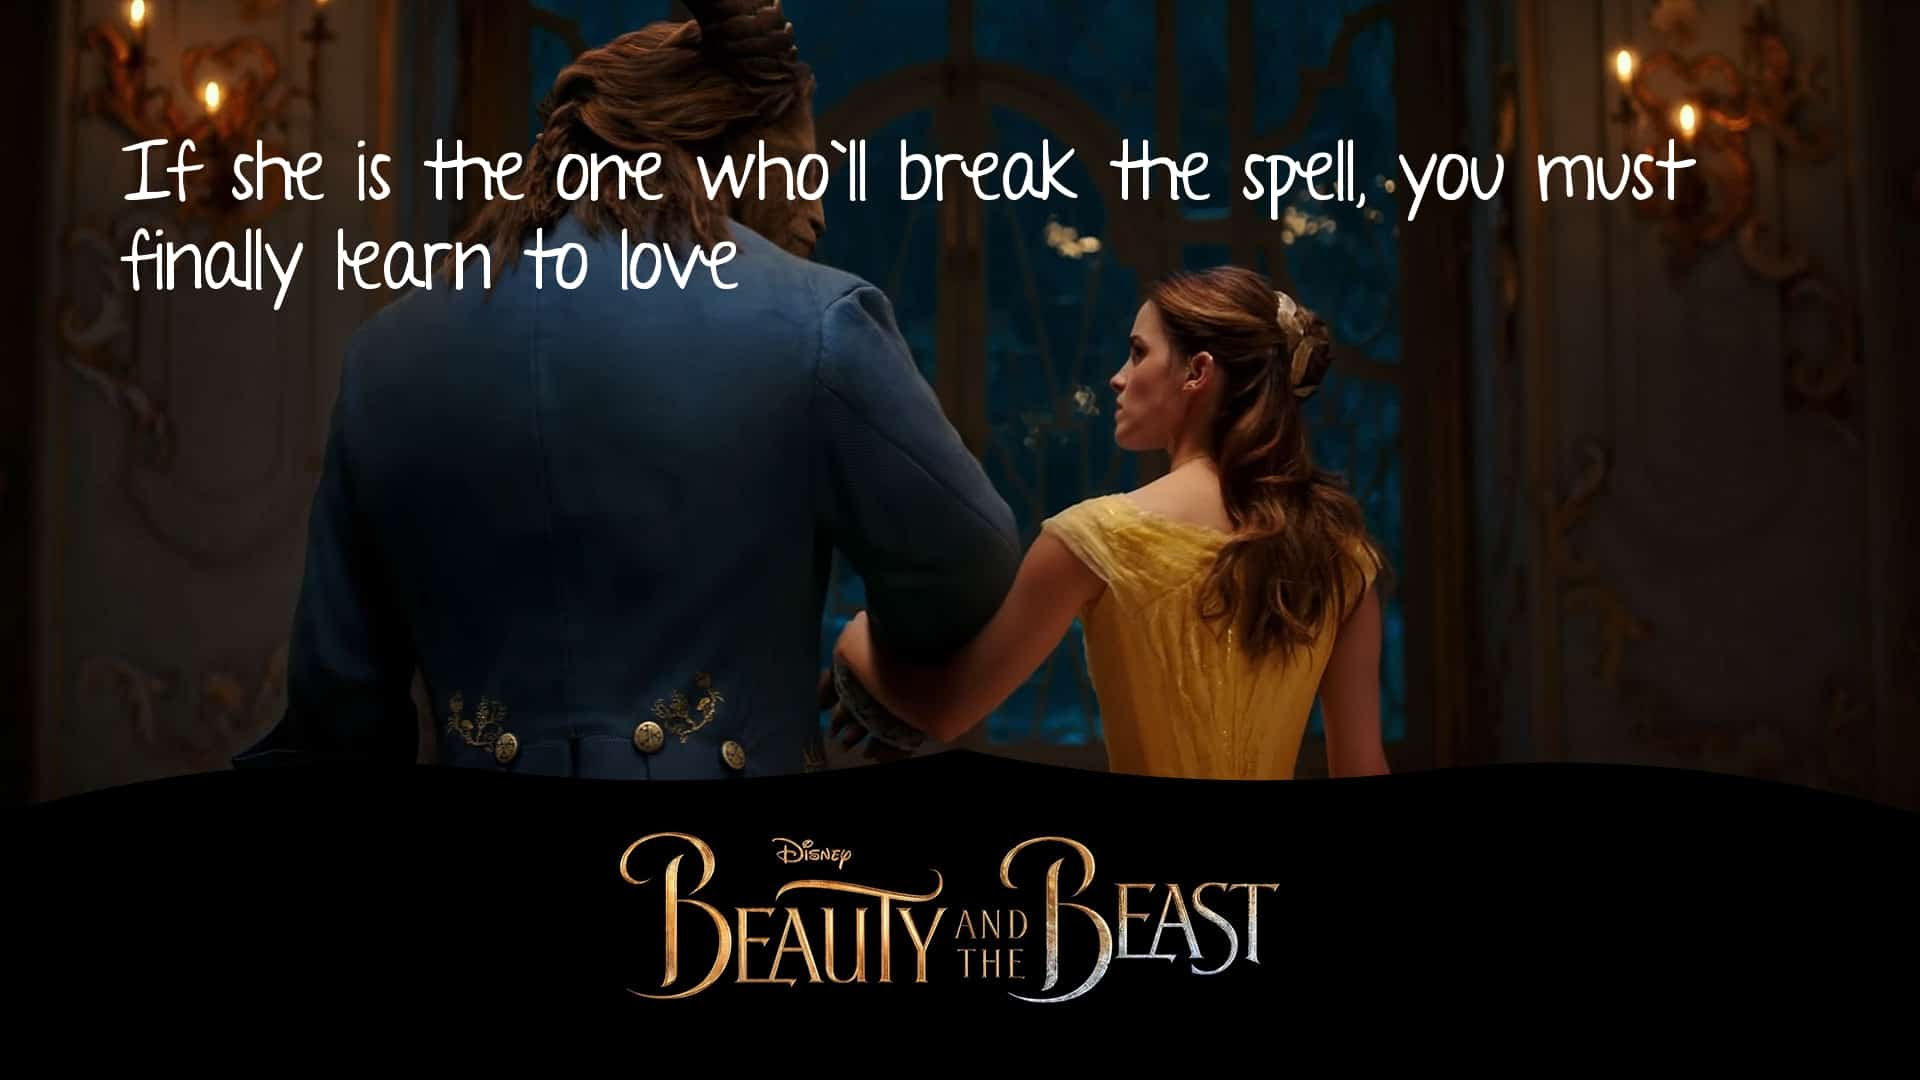 Best Of Disney Love Quotes Beauty and the Beast | Love quotes